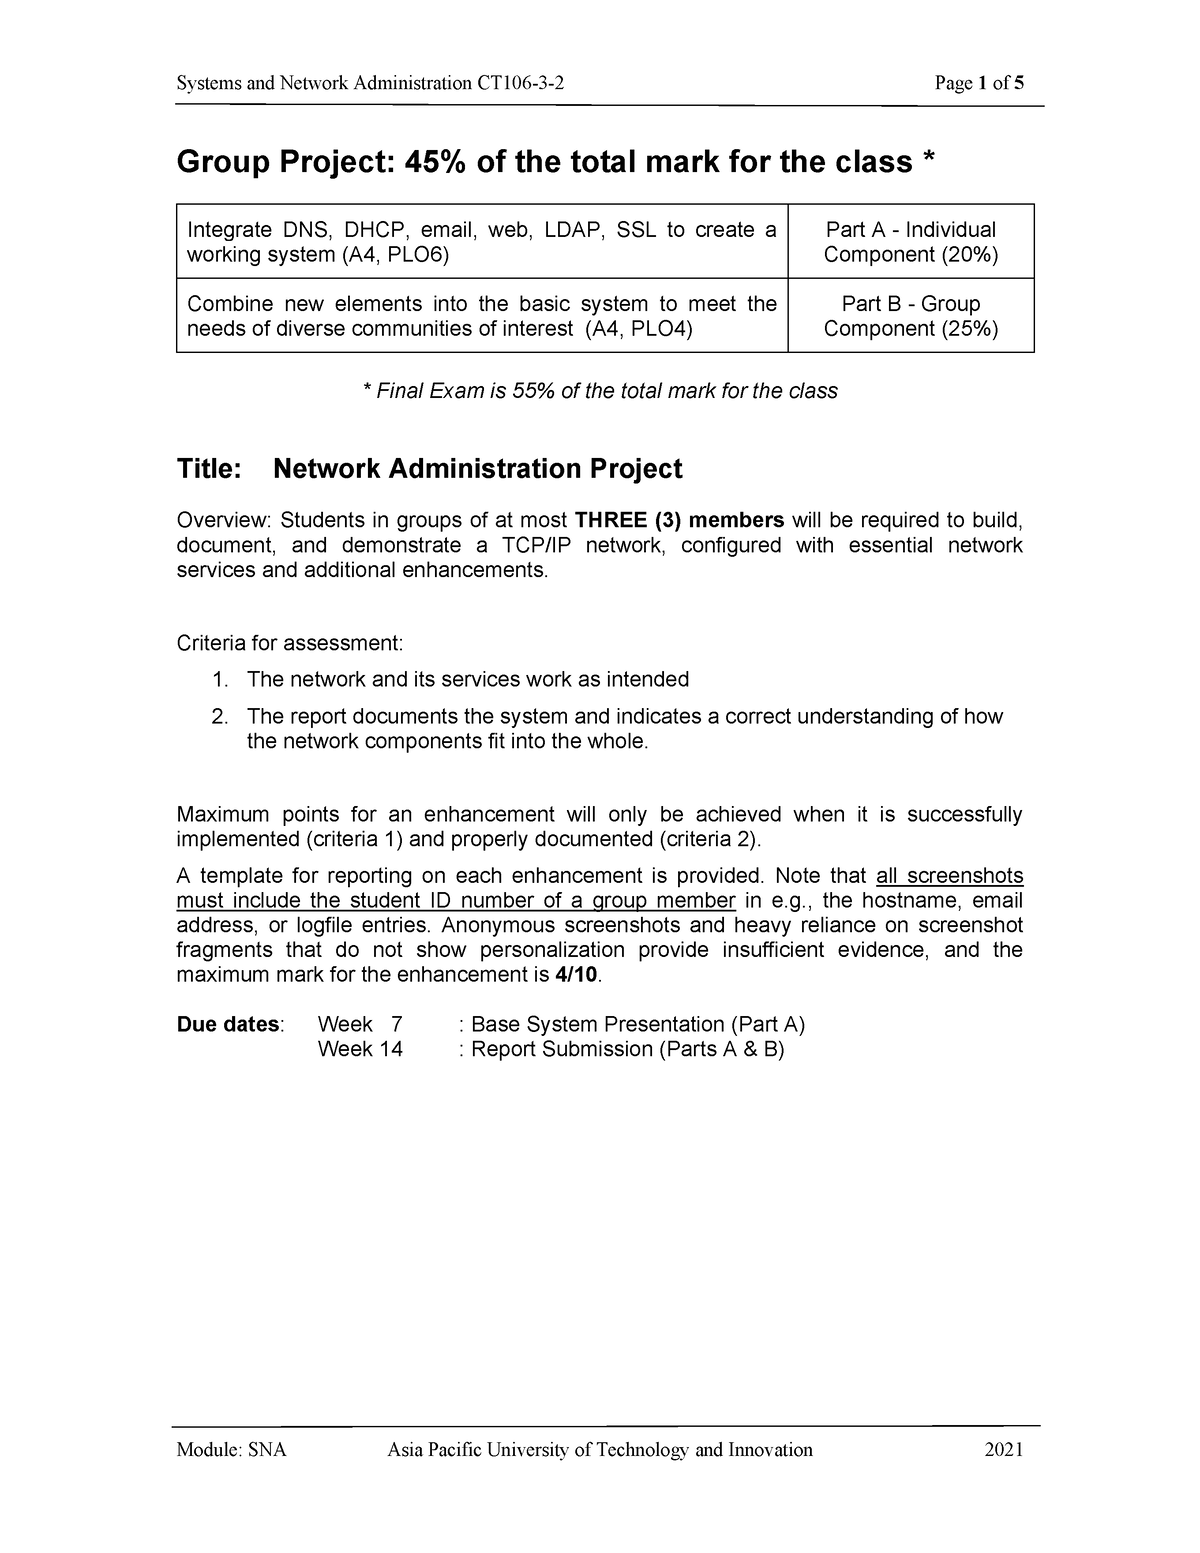 system and network administration assignment